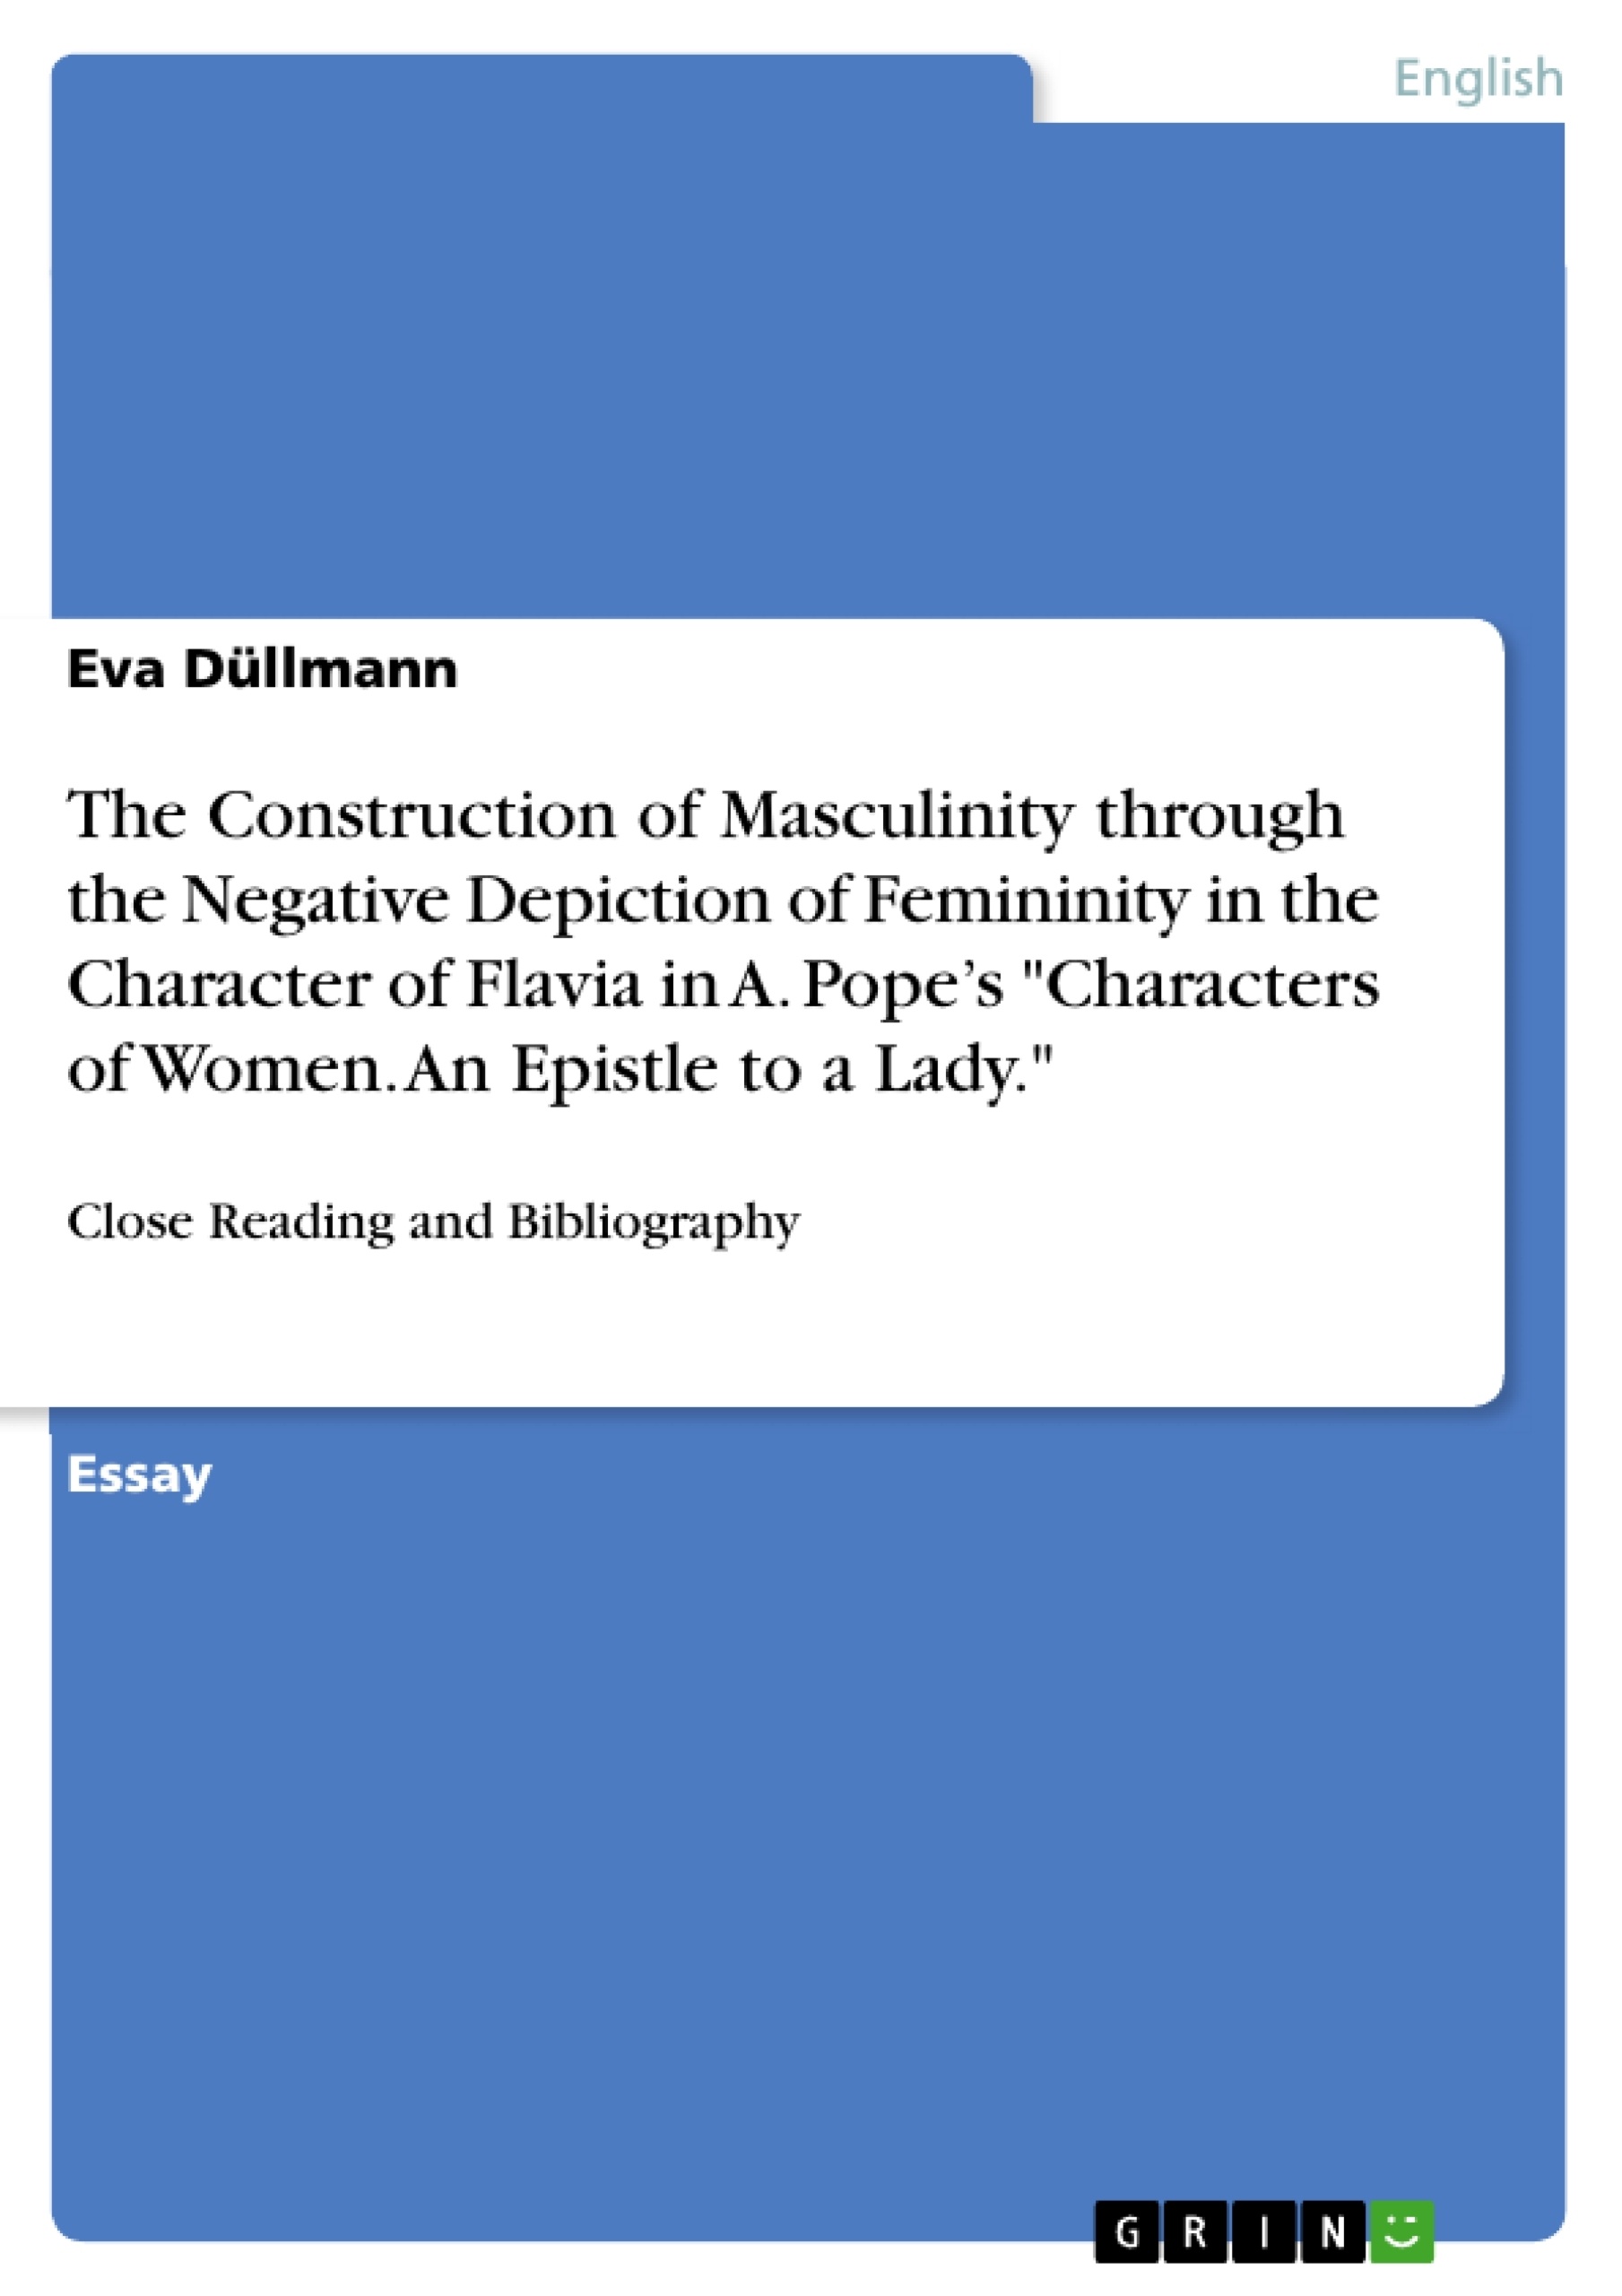 Title: The Construction of Masculinity through the Negative Depiction of Femininity in the Character of Flavia in A. Pope’s "Characters of Women. An Epistle to a Lady."